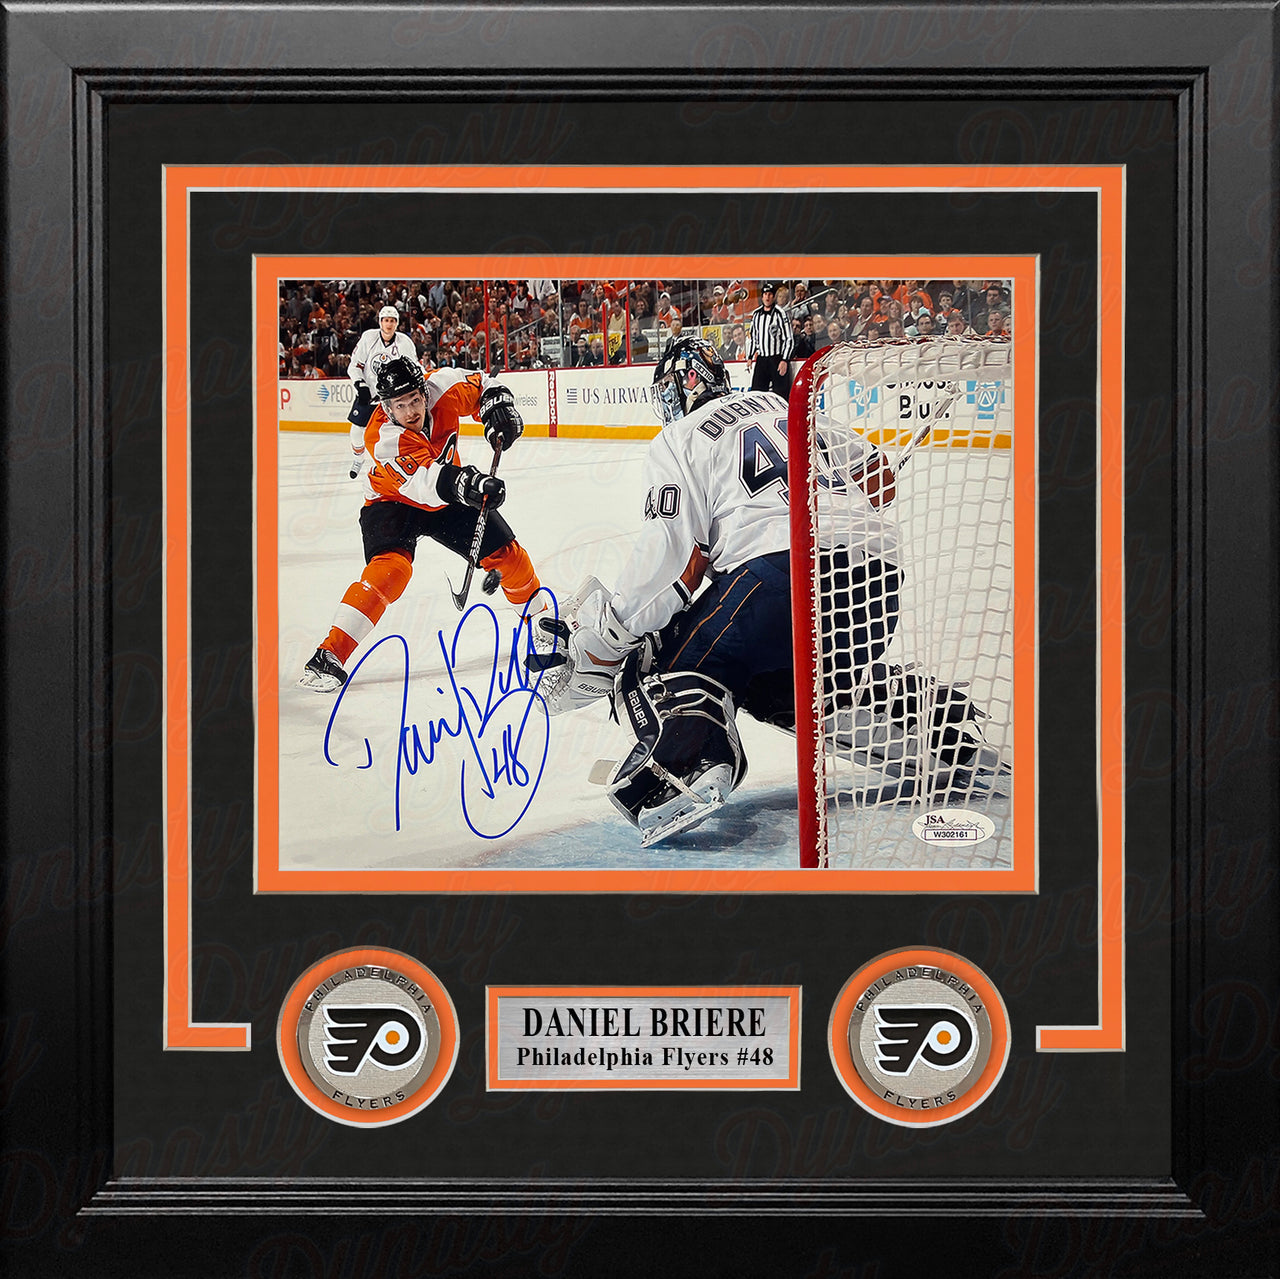 Daniel Briere in Action Autographed Philadelphia Flyers 8" x 10" Framed Hockey Photo